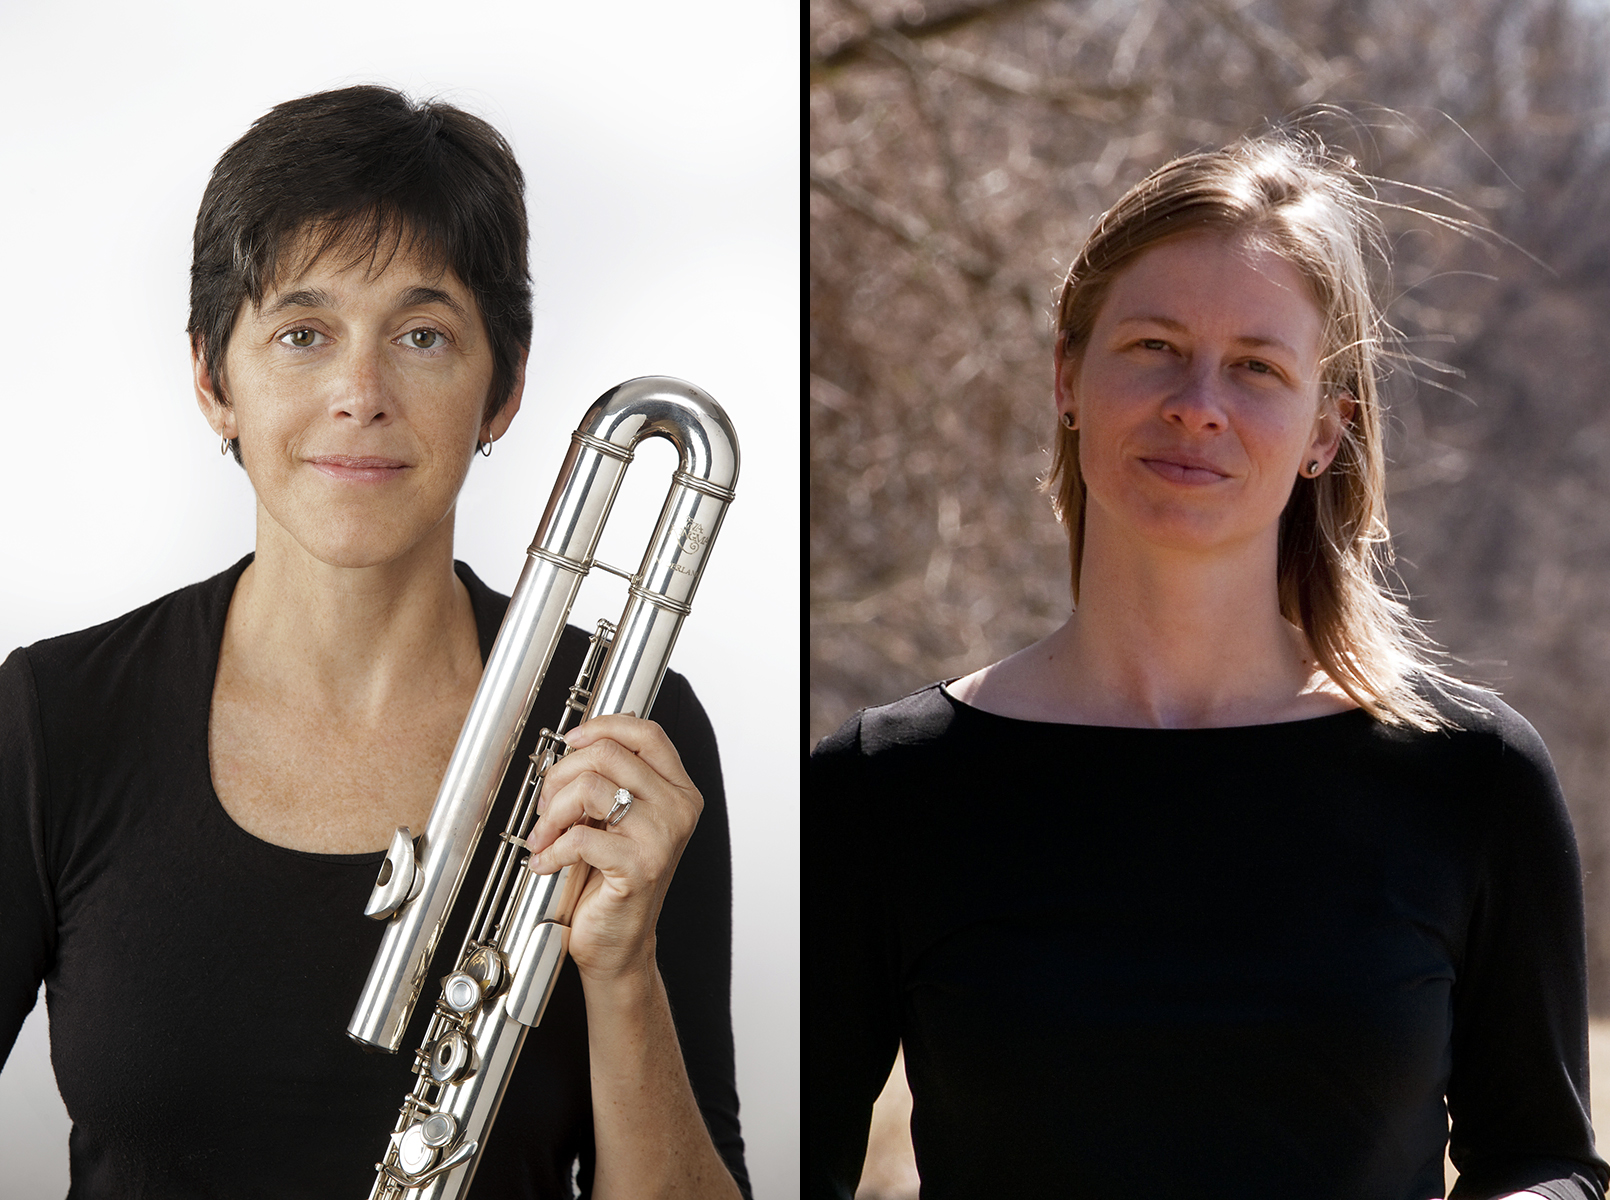 Two women in side-by-side images, the one on the left holding a bass flute